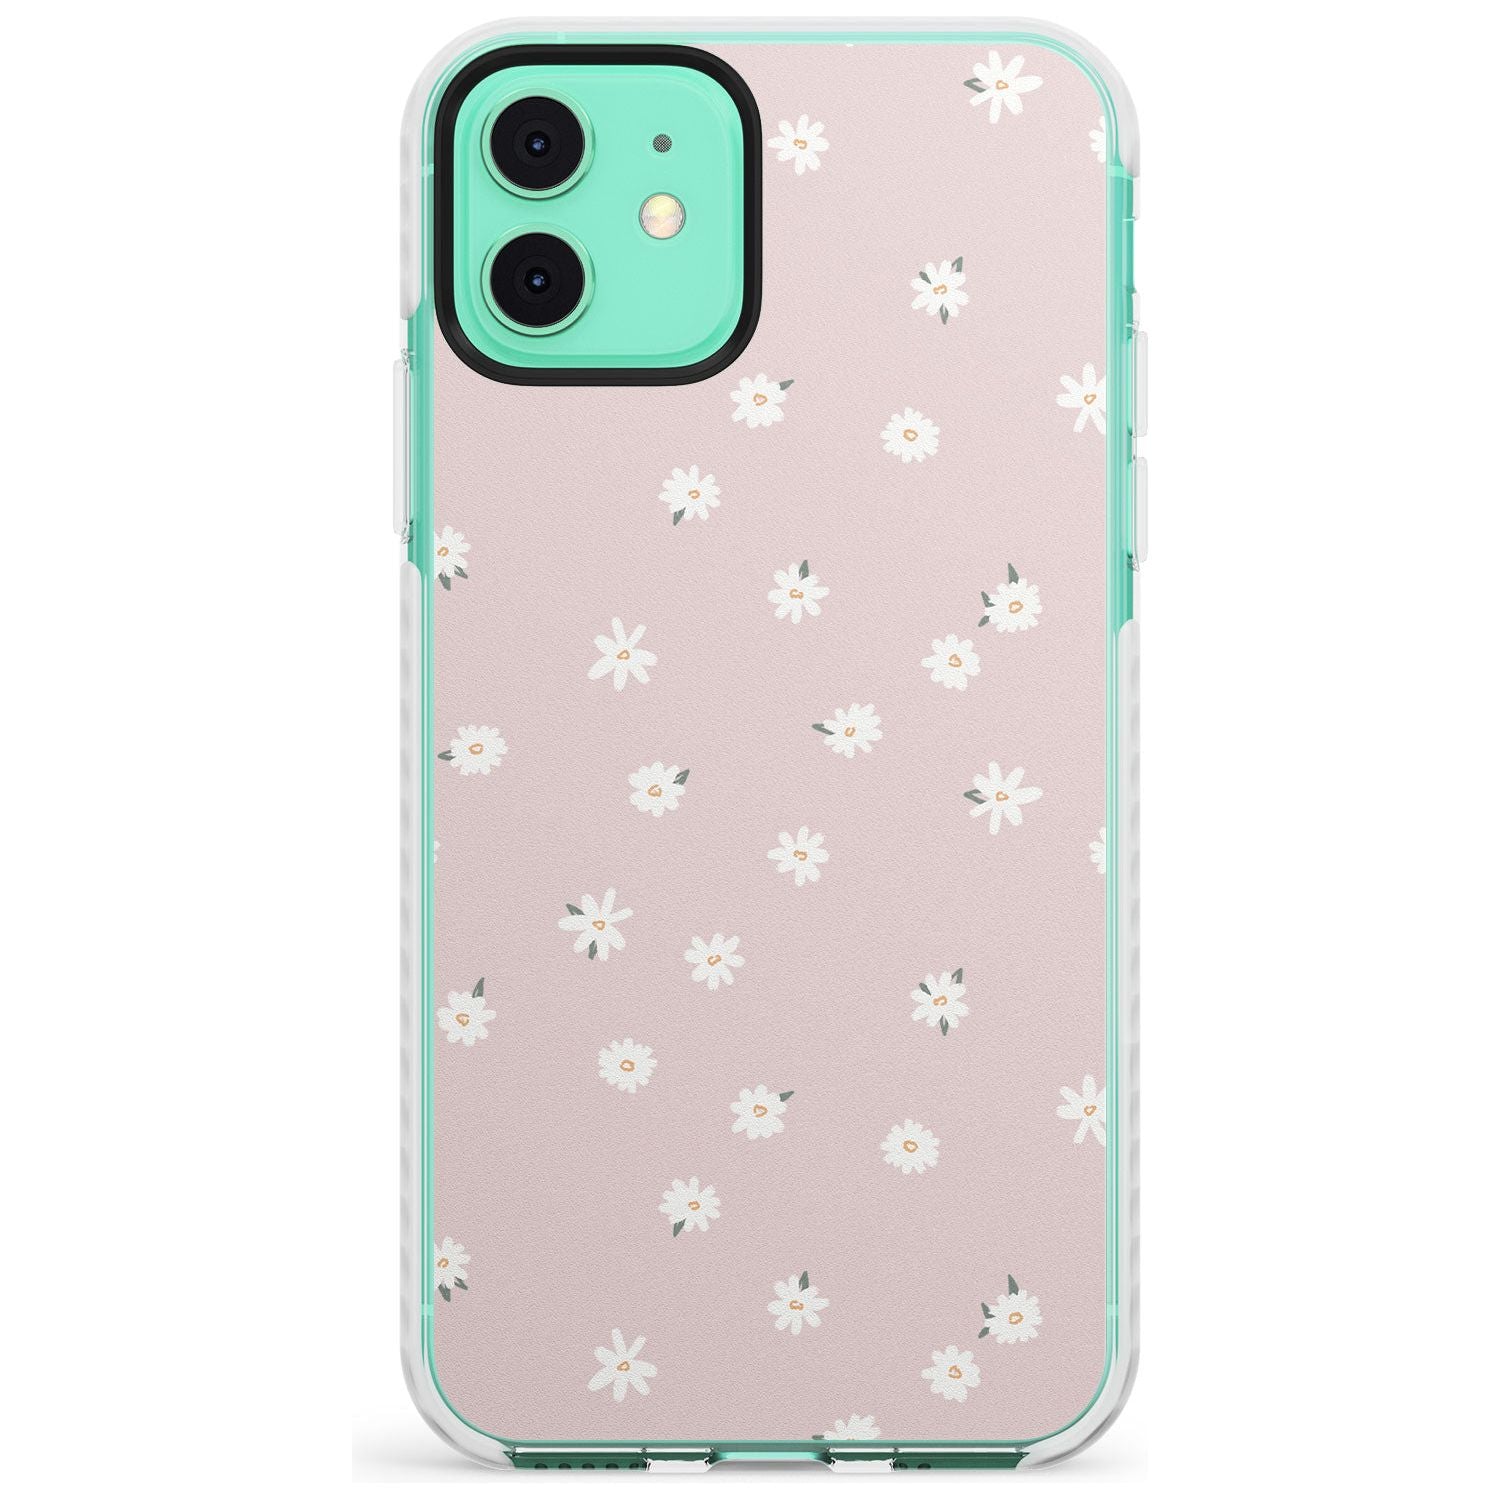 Painted Daises on Pink - Cute Floral Daisy Design Slim TPU Phone Case for iPhone 11